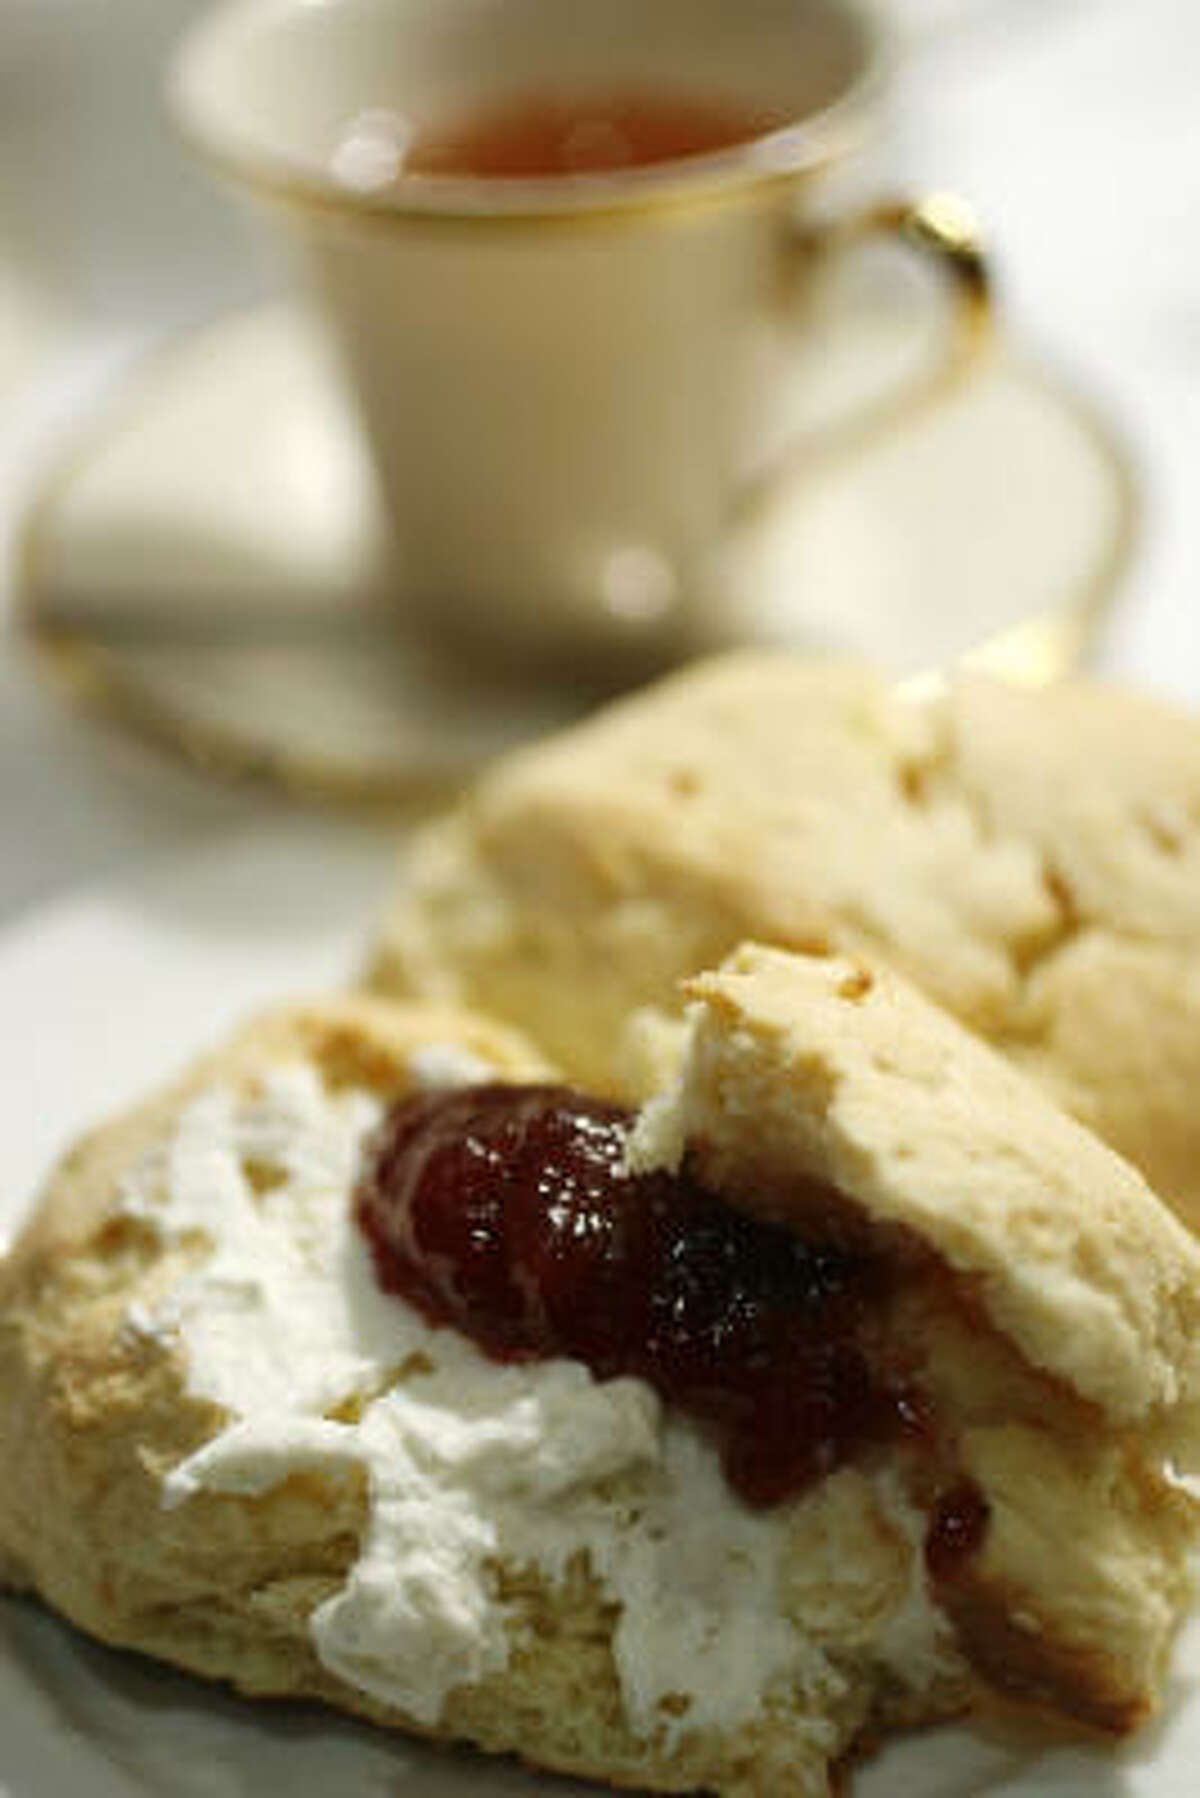 Slathered with clotted cream and strawberry preserves, this tender, cakelike golden scone is a snap to make with a couple of eggs and King Arthur Flour's Cream Tea Scone Mix. See Quick-Fix Scones below for more on mixes.